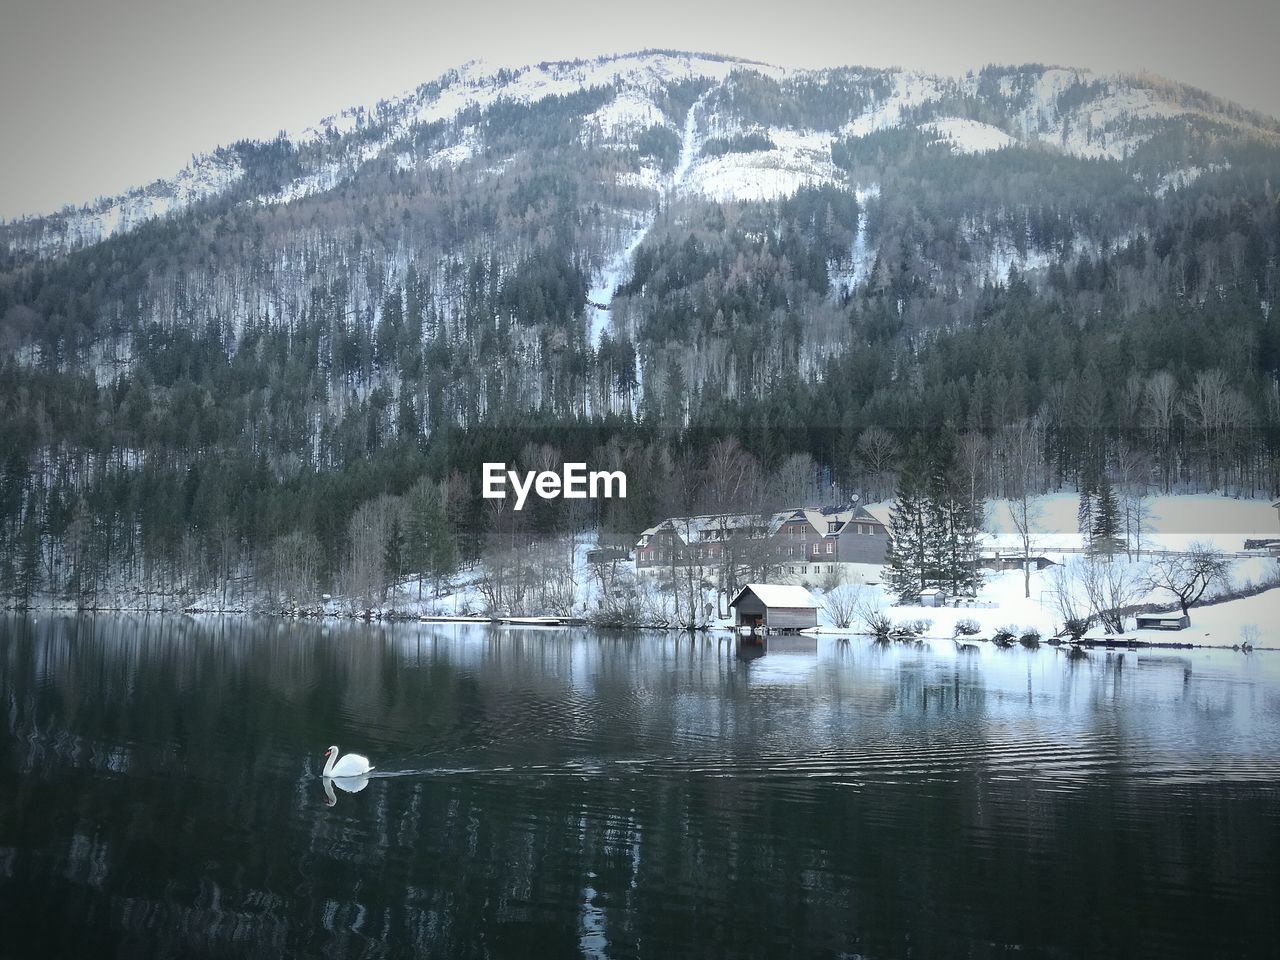 SWANS ON FROZEN LAKE AGAINST MOUNTAINS